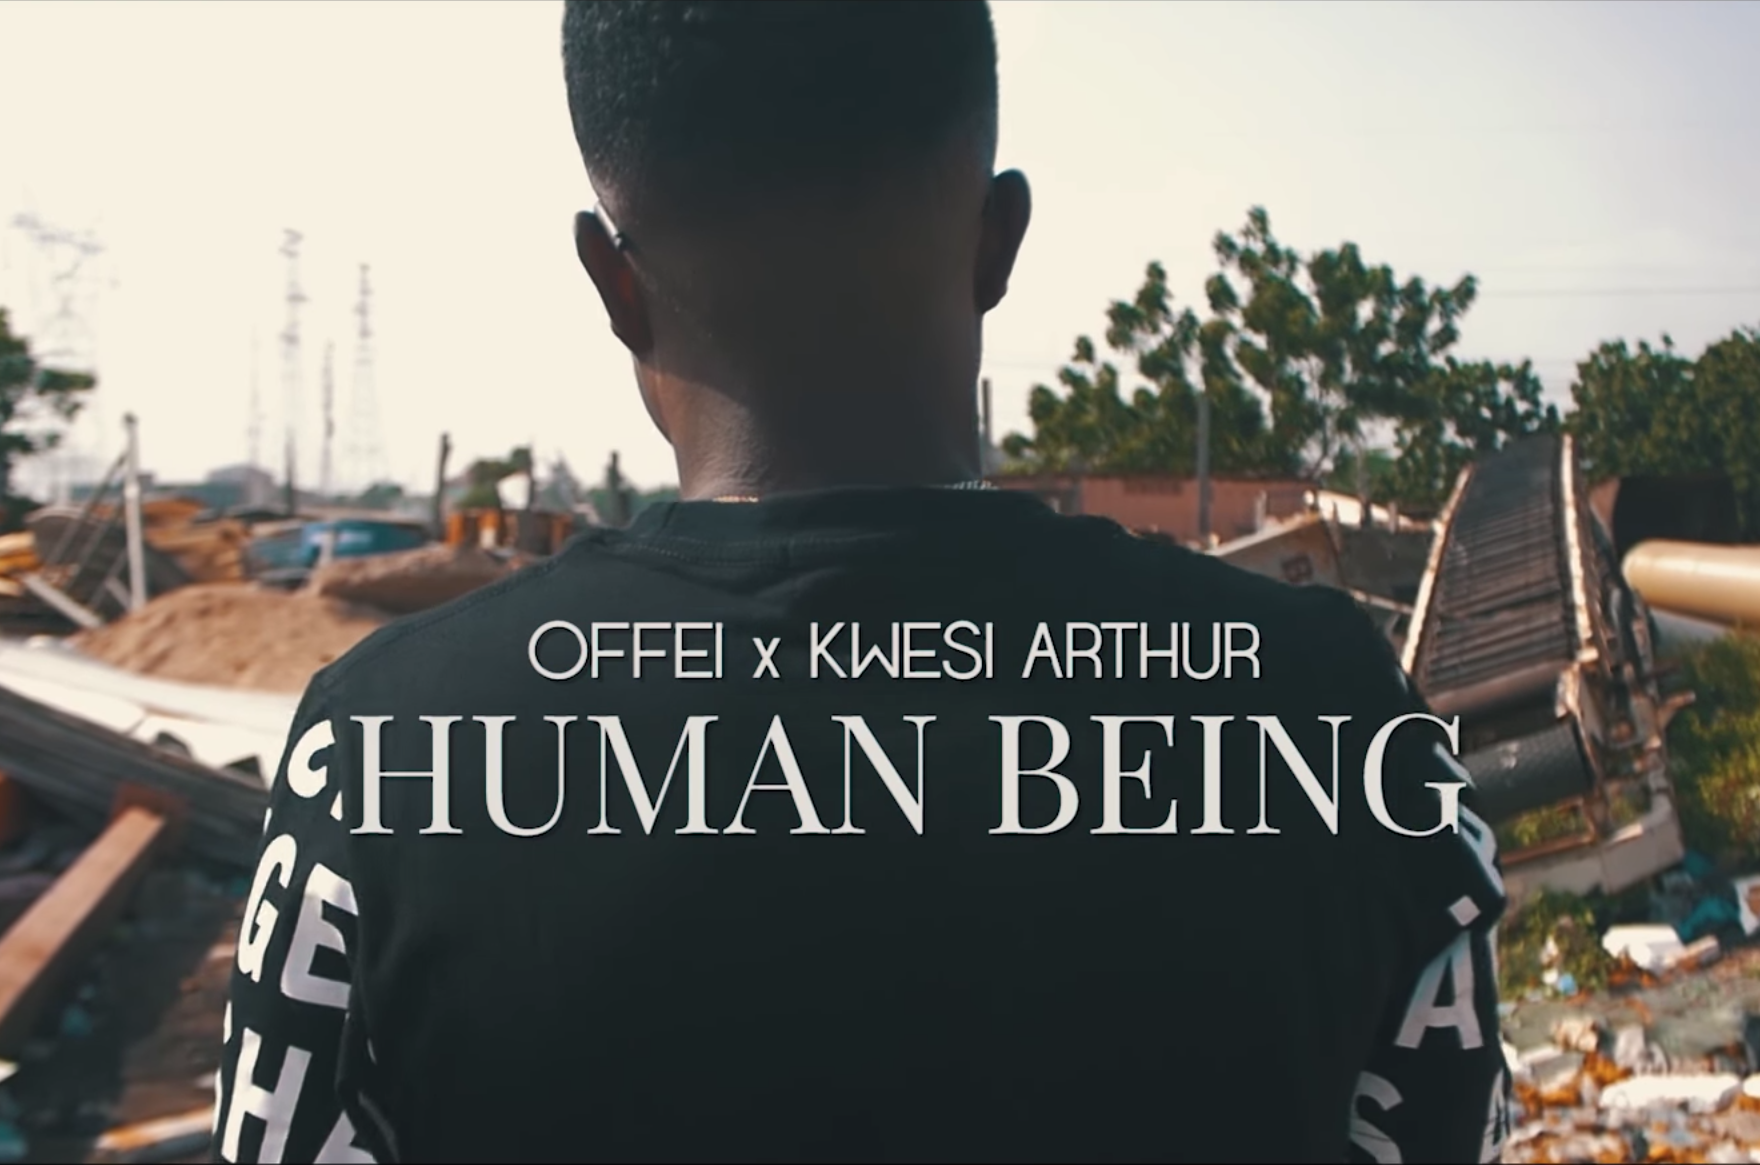 Offei, Human Being